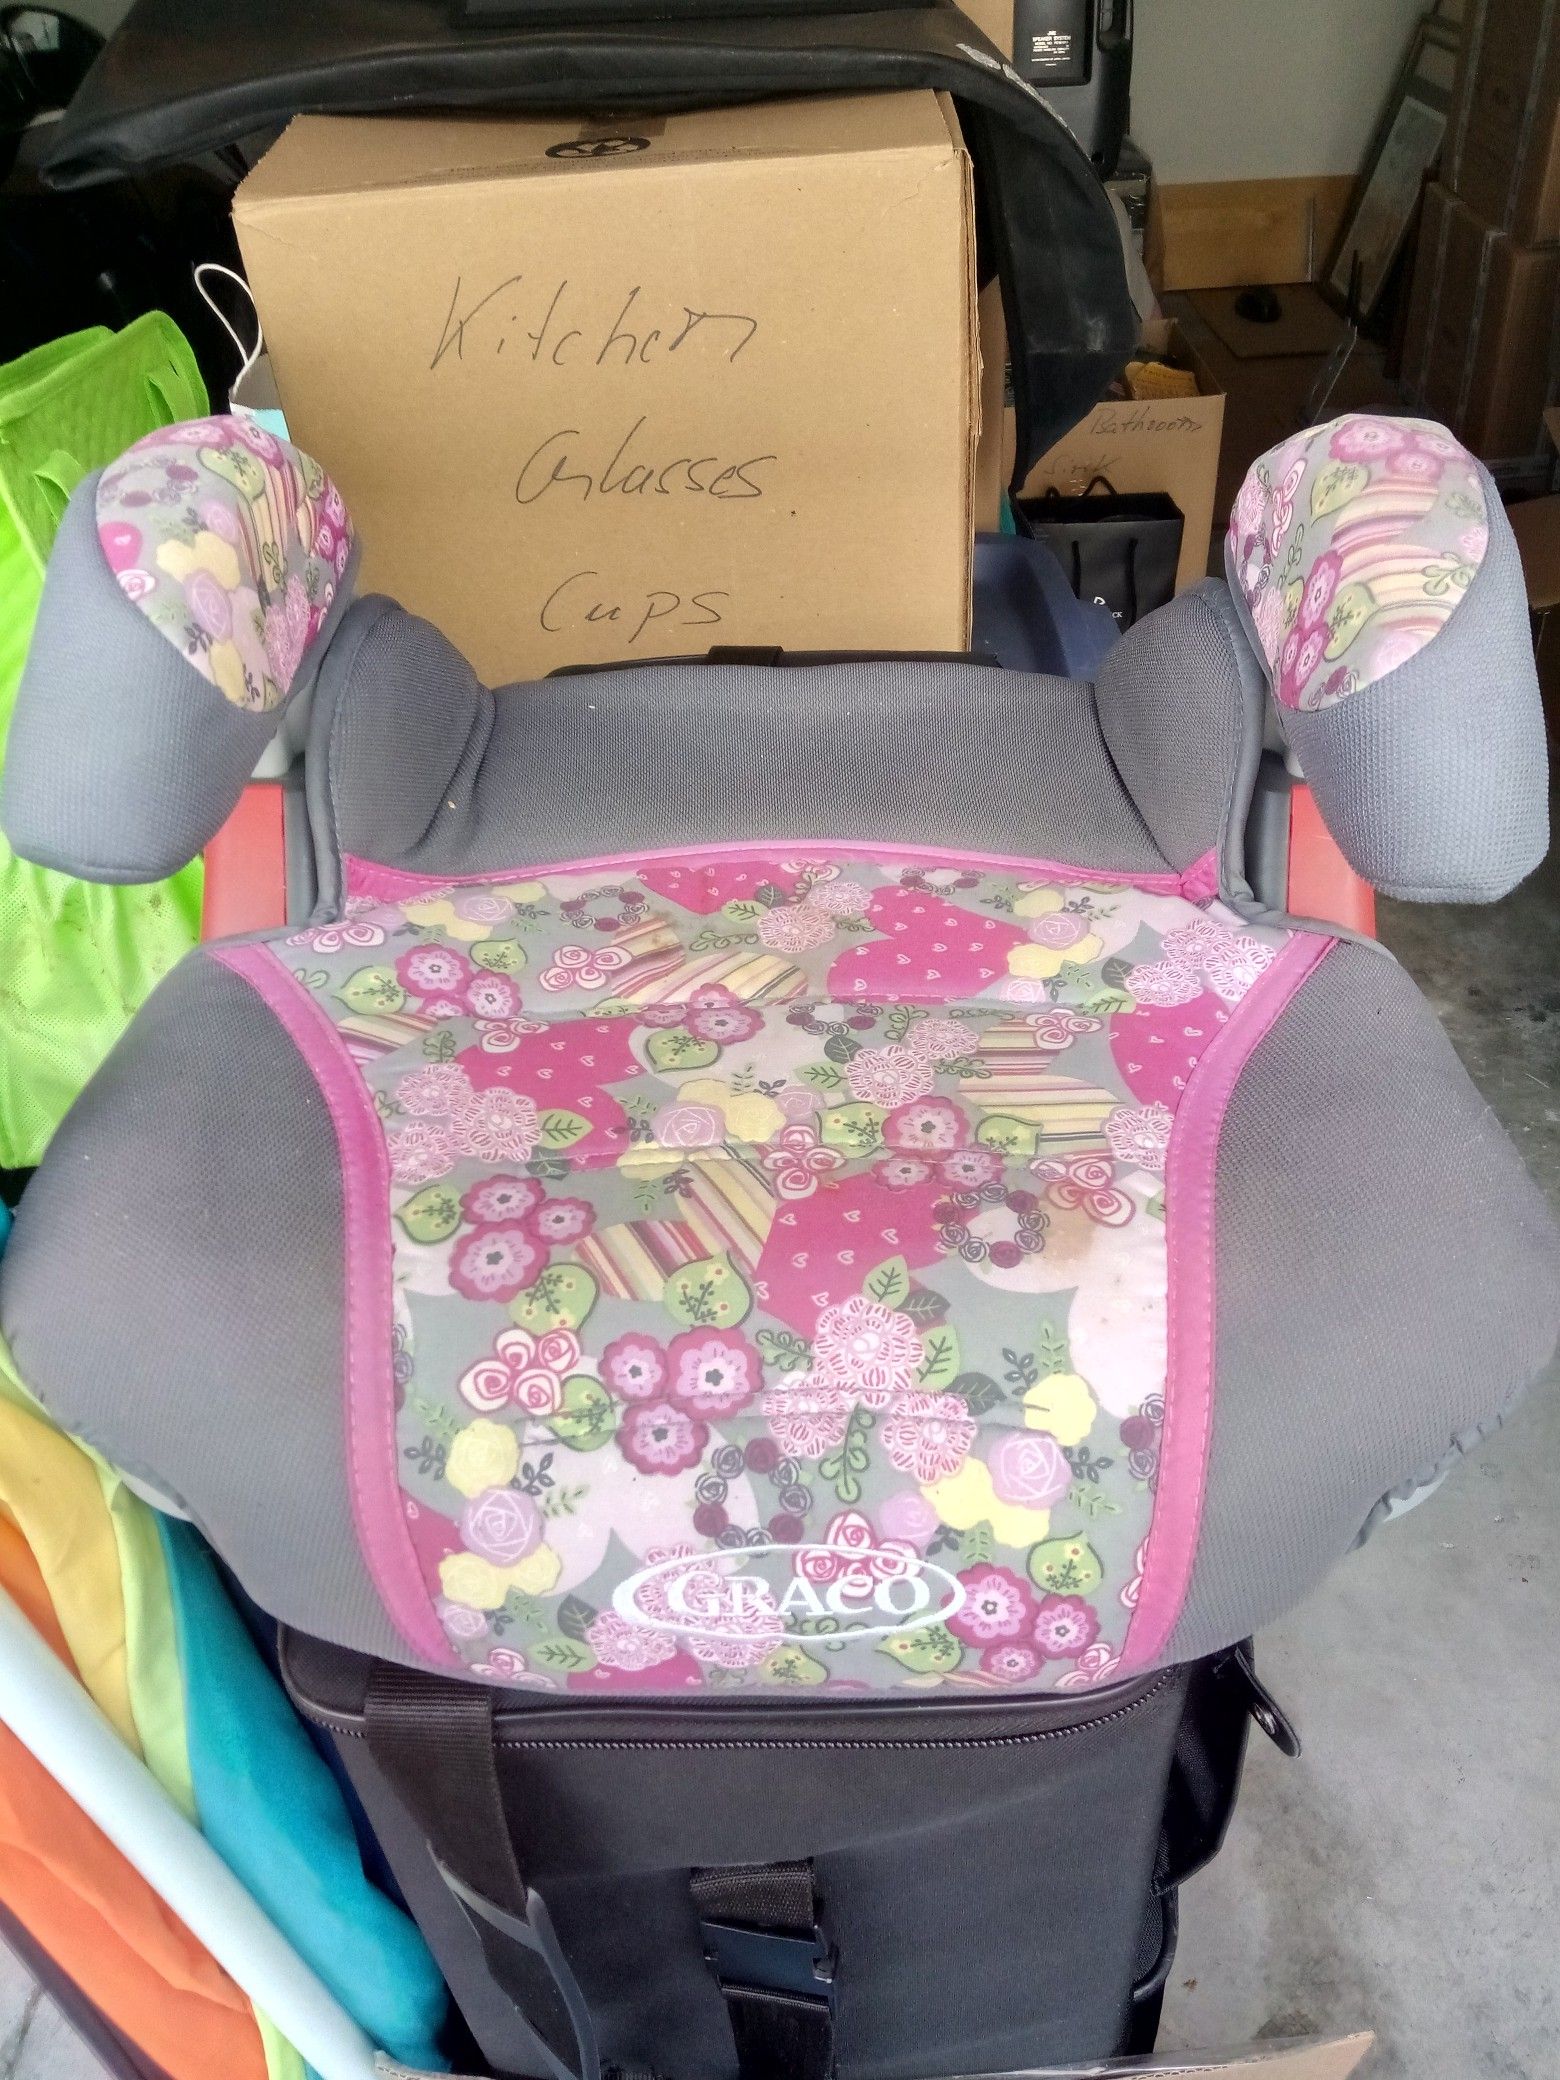 Graco Booster seat